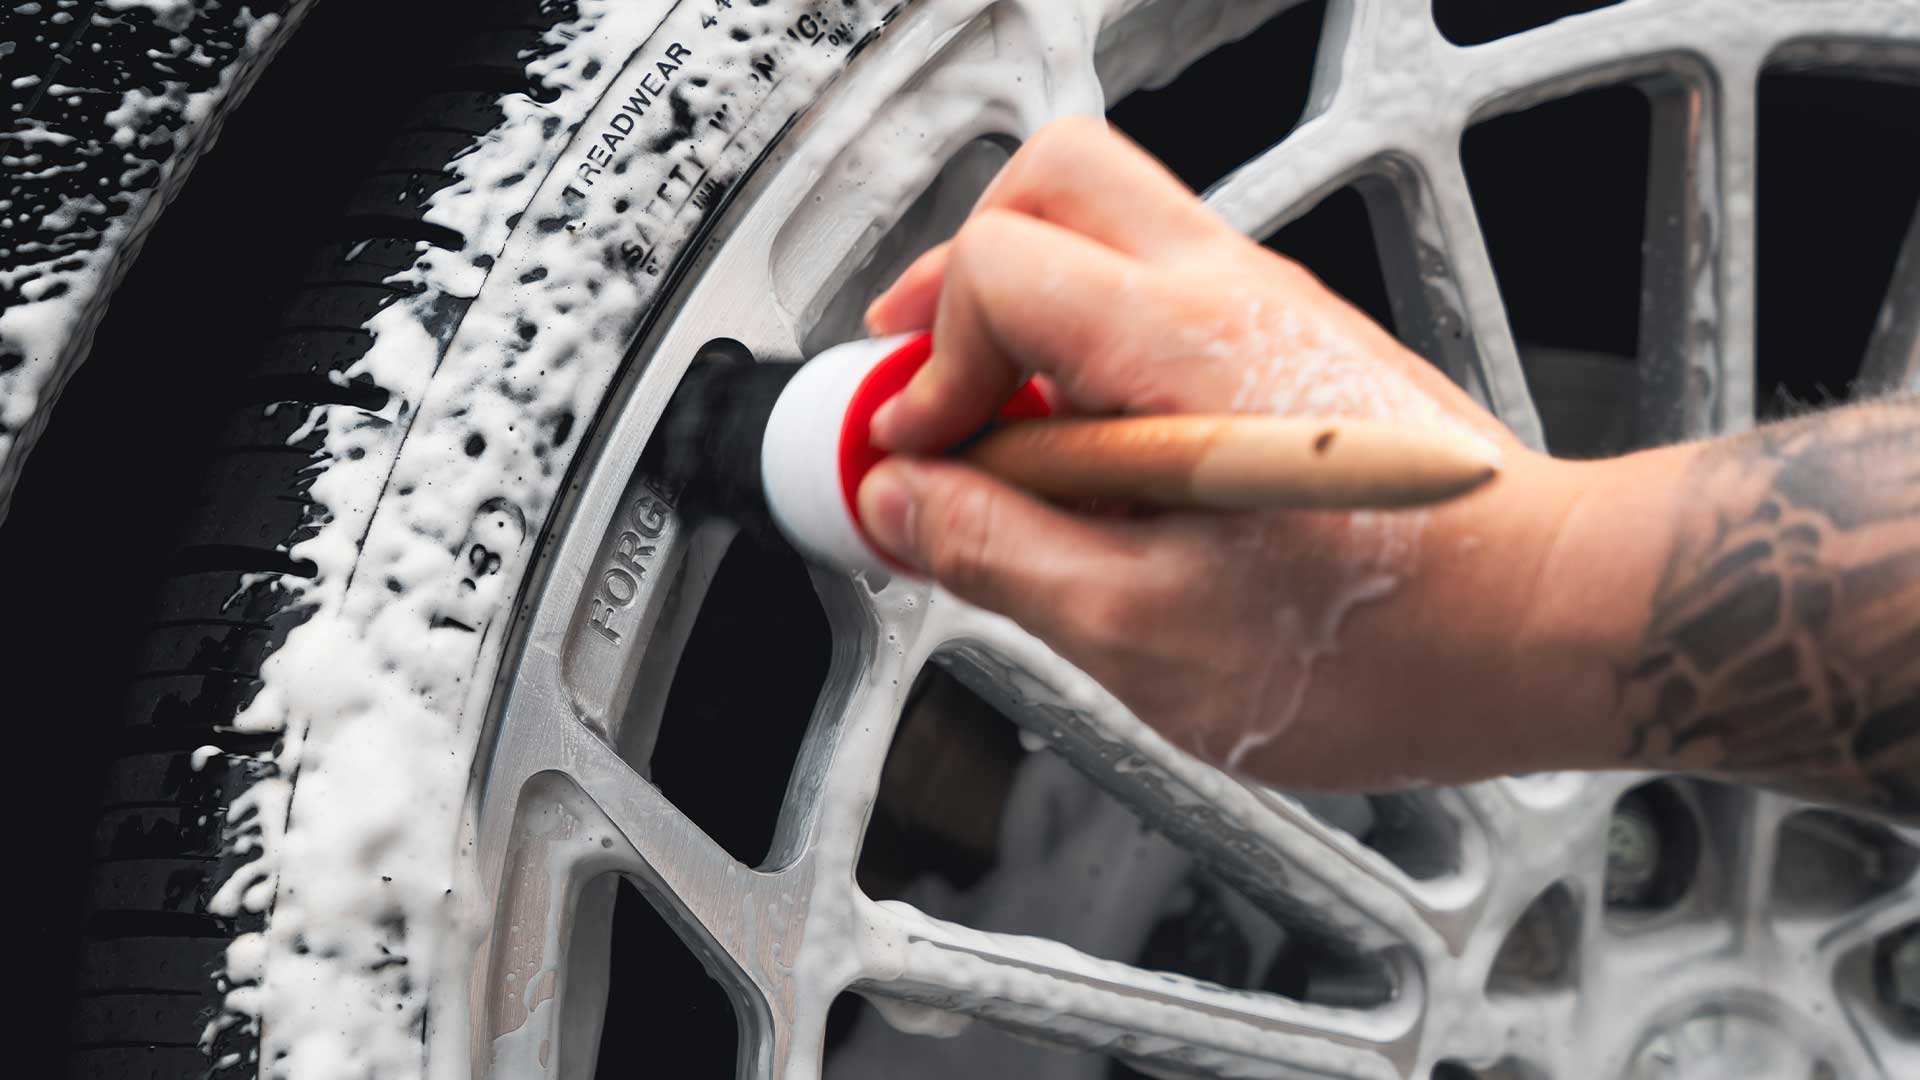 cleaning wheel and tire with brush